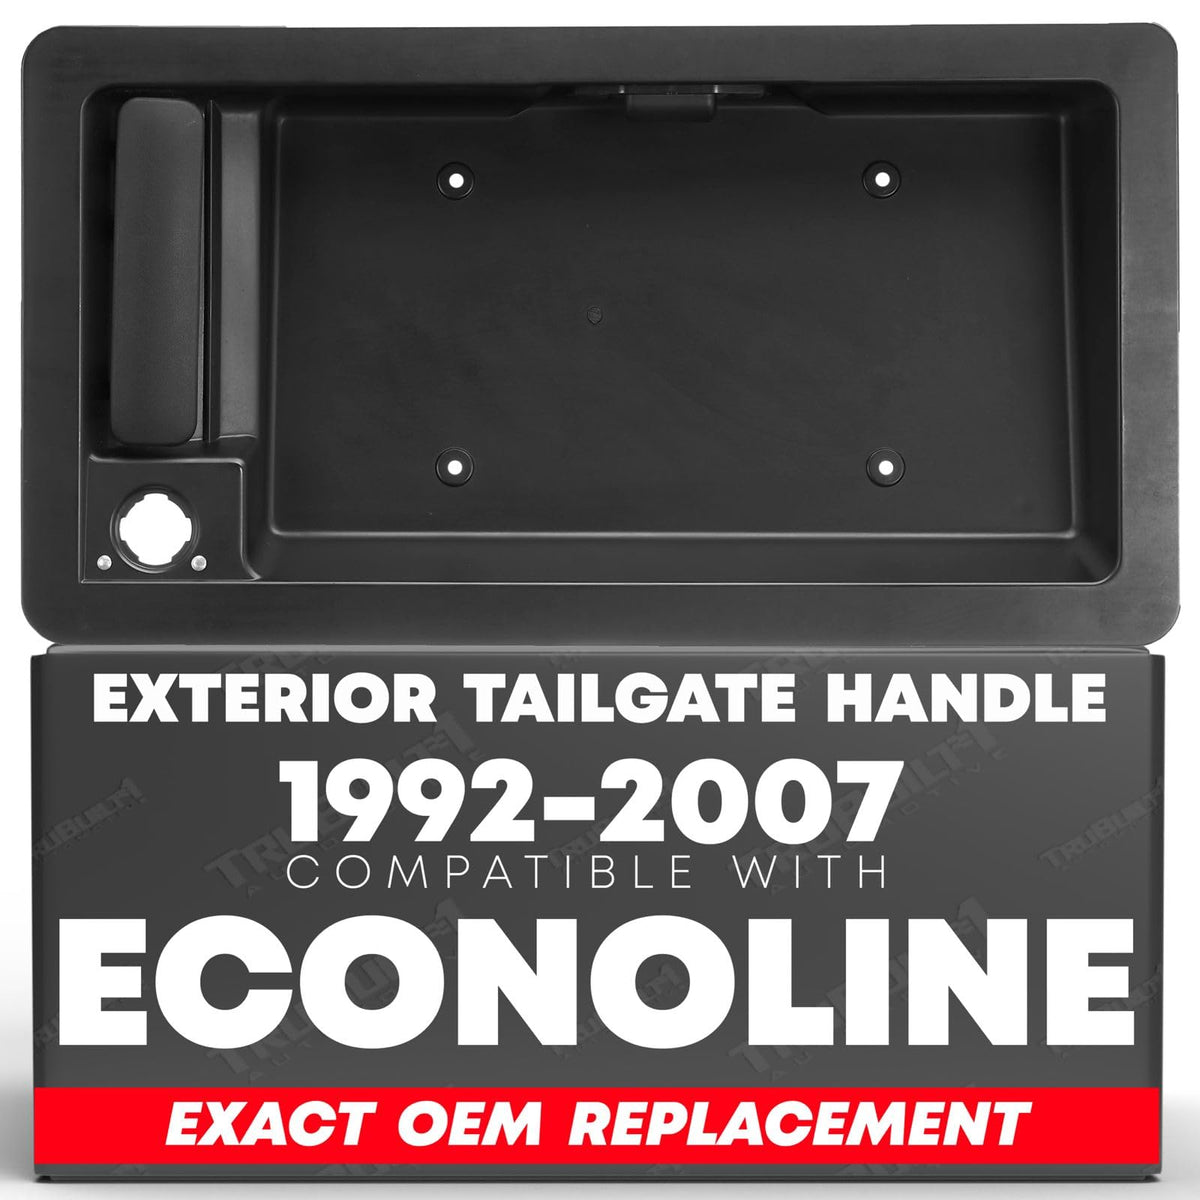 Tailgate Handle Assembly - Compatible with 1992-2007 Ford Econoline - Rear Right Back Cargo Door Handle with License Plate Tag Bracket - Black, Plastic - OEM F6UZ-15434A20-AAA, 80915